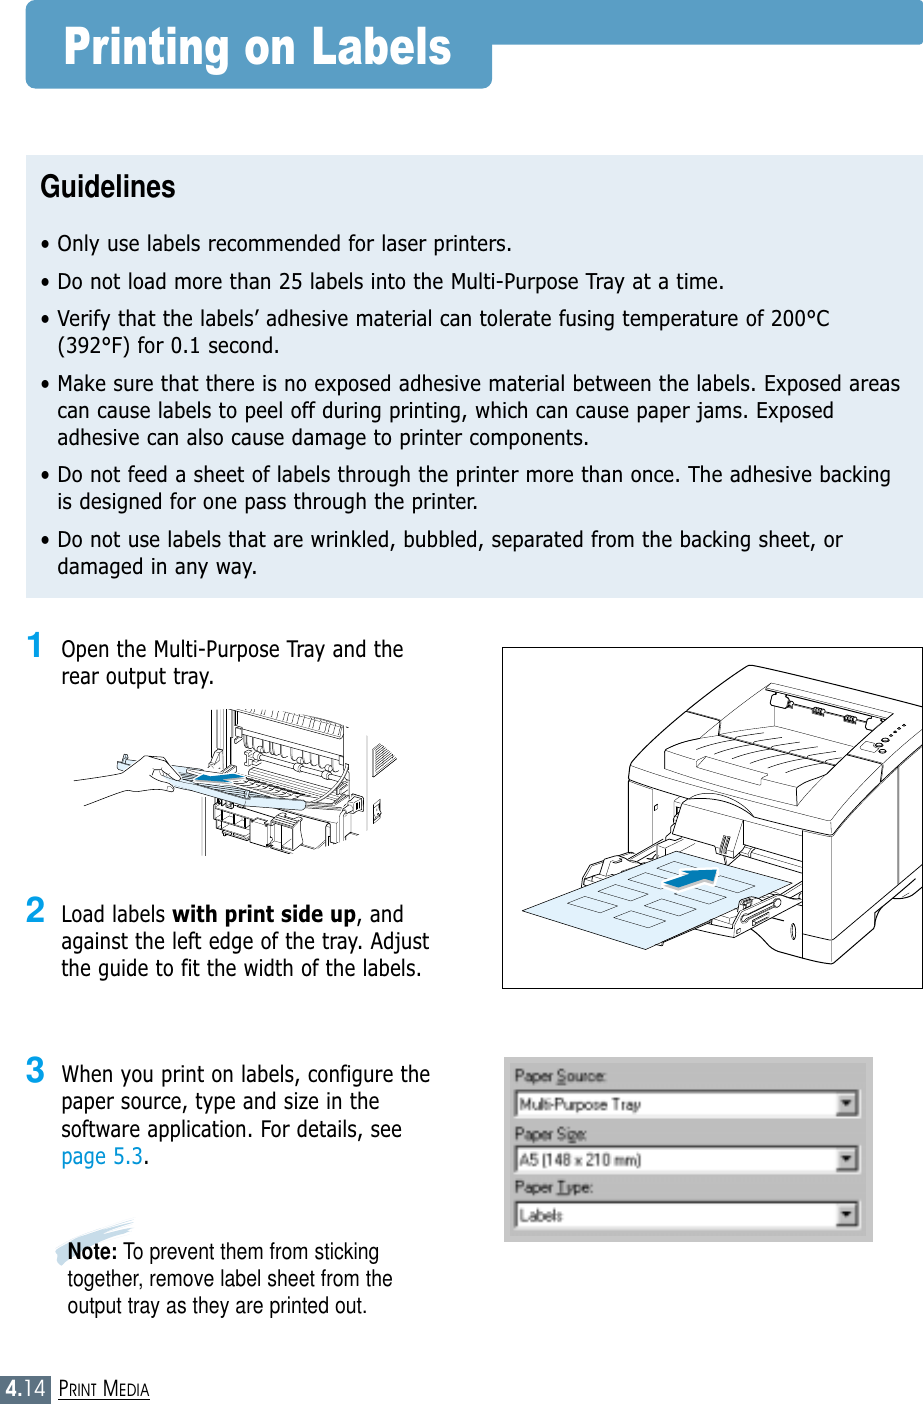 4.14PRINT MEDIAPrinting on LabelsGuidelines• Only use labels recommended for laser printers.• Do not load more than 25 labels into the Multi-Purpose Tray at a time.• Verify that the labels’ adhesive material can tolerate fusing temperature of 200°C(392°F) for 0.1 second.• Make sure that there is no exposed adhesive material between the labels. Exposed areascan cause labels to peel off during printing, which can cause paper jams. Exposedadhesive can also cause damage to printer components.• Do not feed a sheet of labels through the printer more than once. The adhesive backingis designed for one pass through the printer.• Do not use labels that are wrinkled, bubbled, separated from the backing sheet, ordamaged in any way.1Open the Multi-Purpose Tray and therear output tray.2Load labels with print side up, andagainst the left edge of the tray. Adjustthe guide to fit the width of the labels.3When you print on labels, configure thepaper source, type and size in thesoftware application. For details, seepage 5.3.Note: To prevent them from stickingtogether, remove label sheet from theoutput tray as they are printed out.